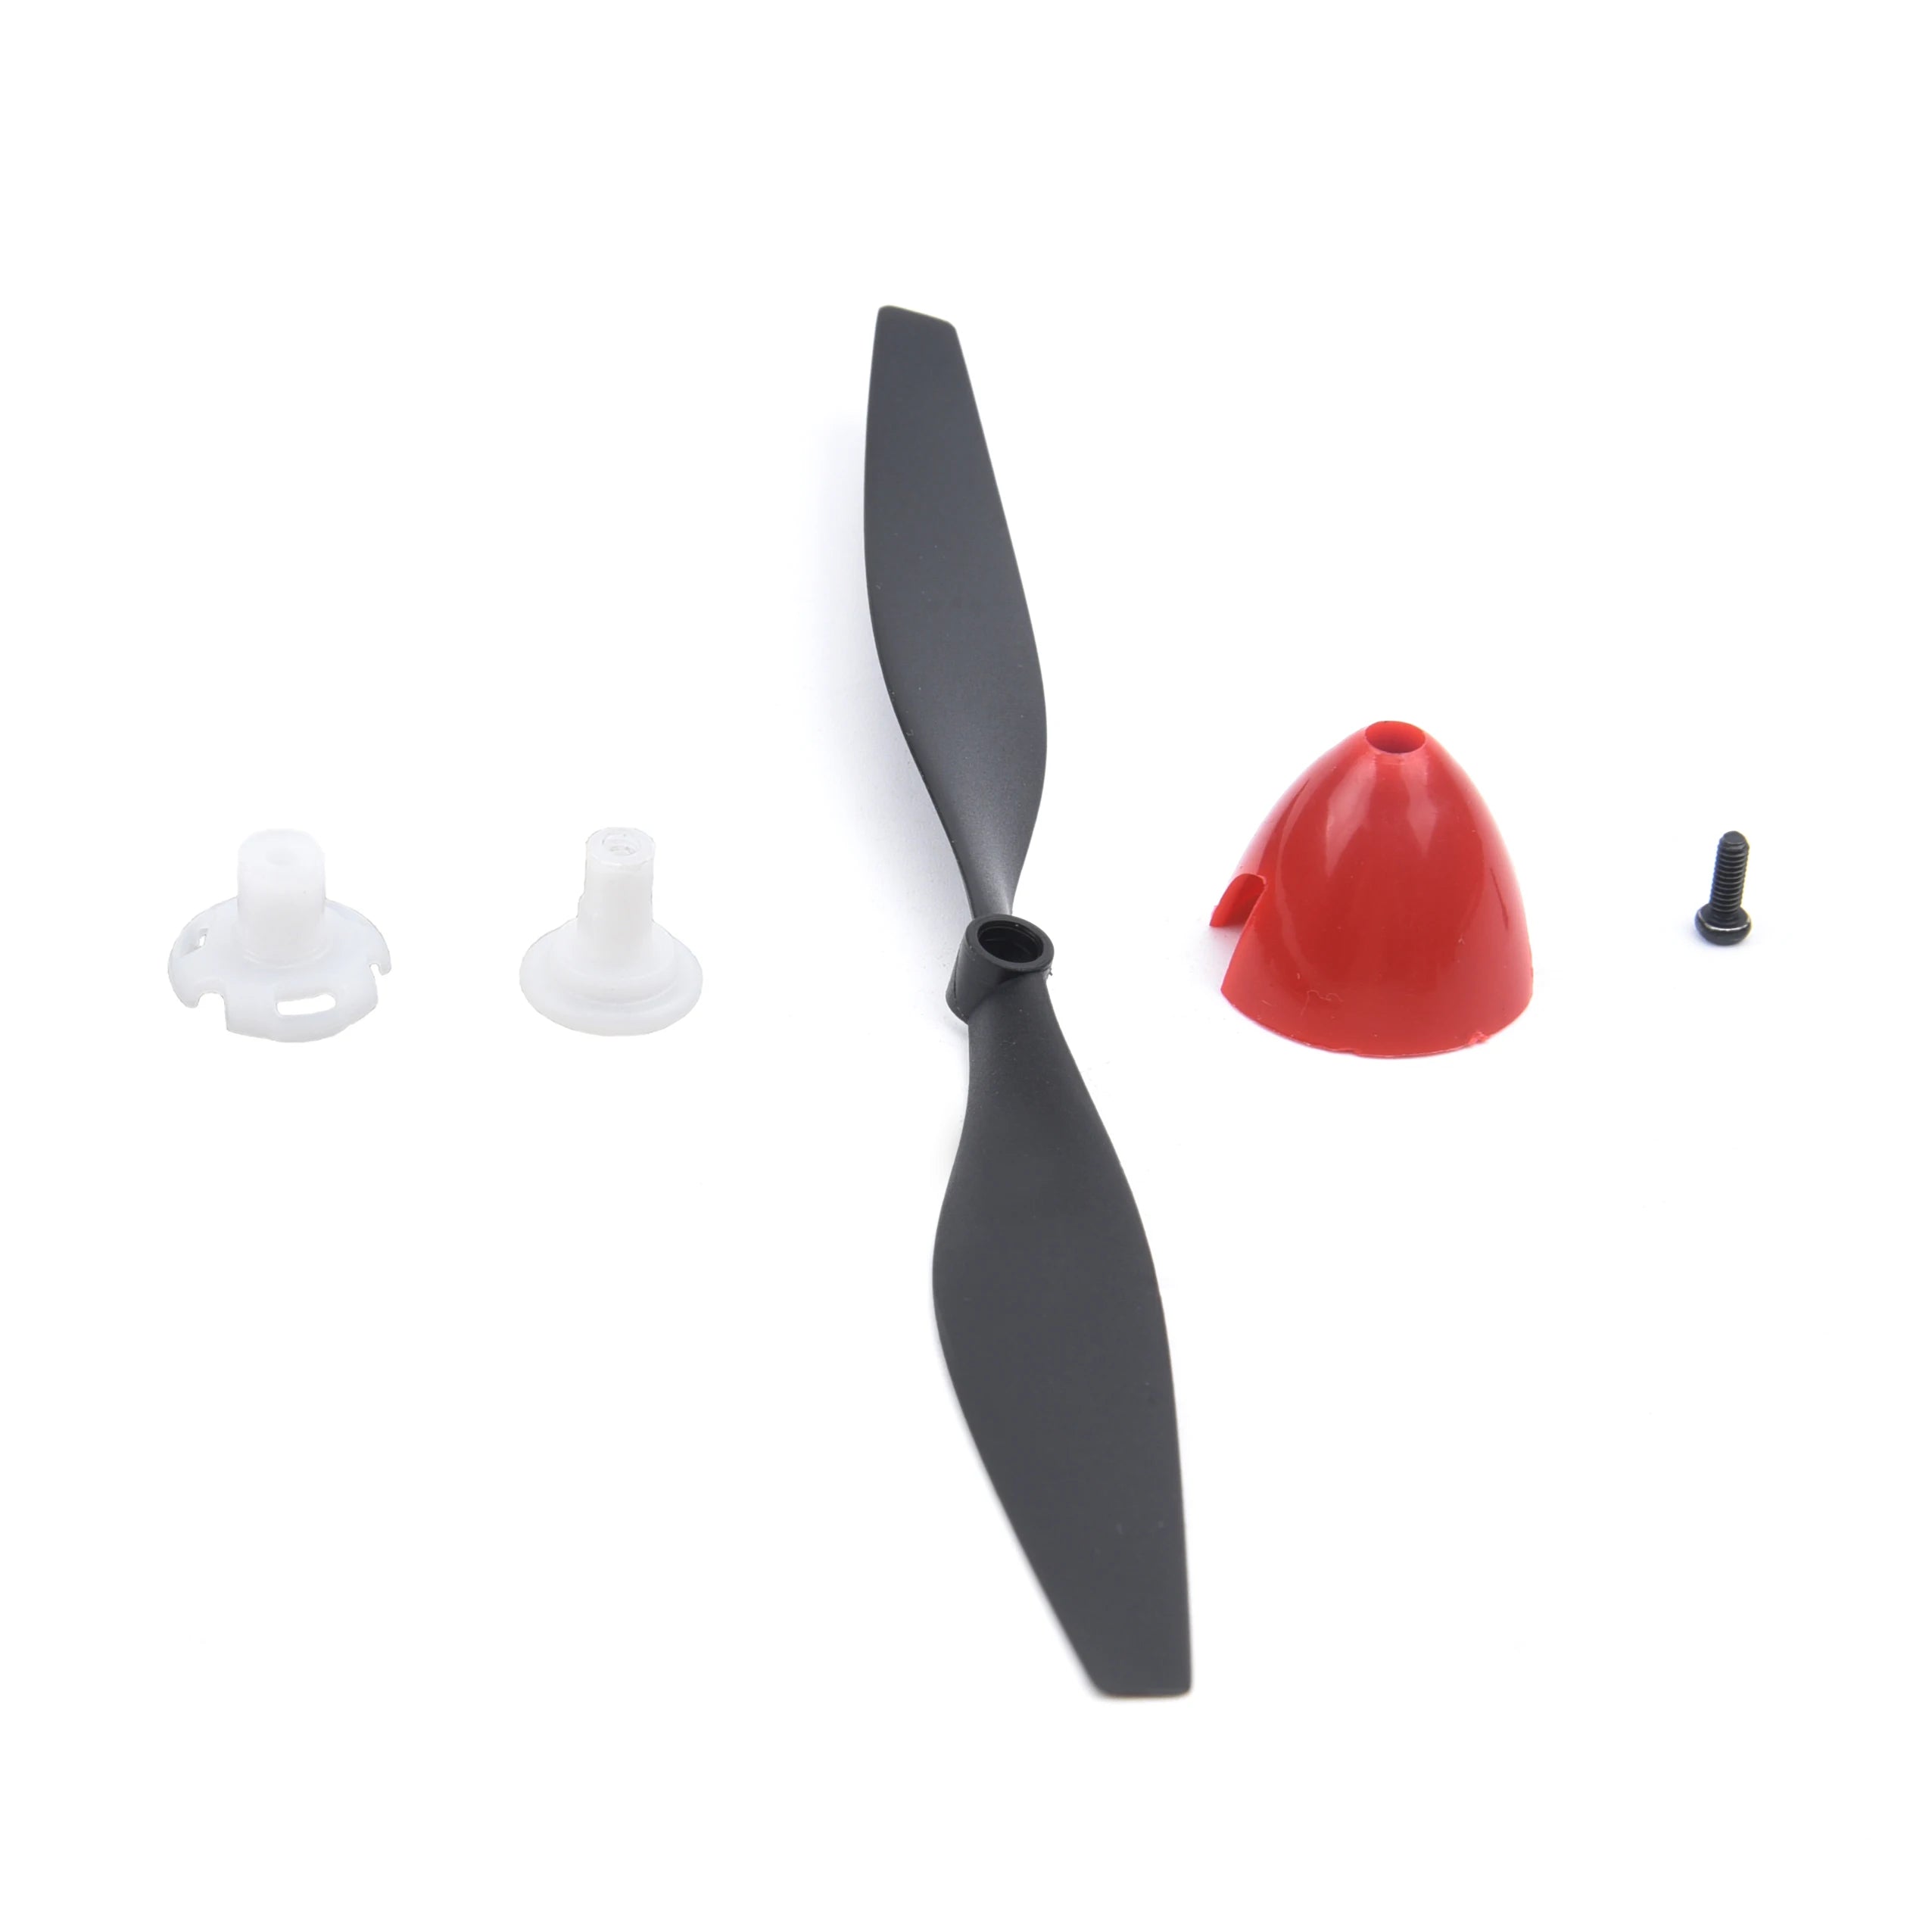 2/4PCs 130mmX70mm Propeller, original spare propellers, 100% new, good quality